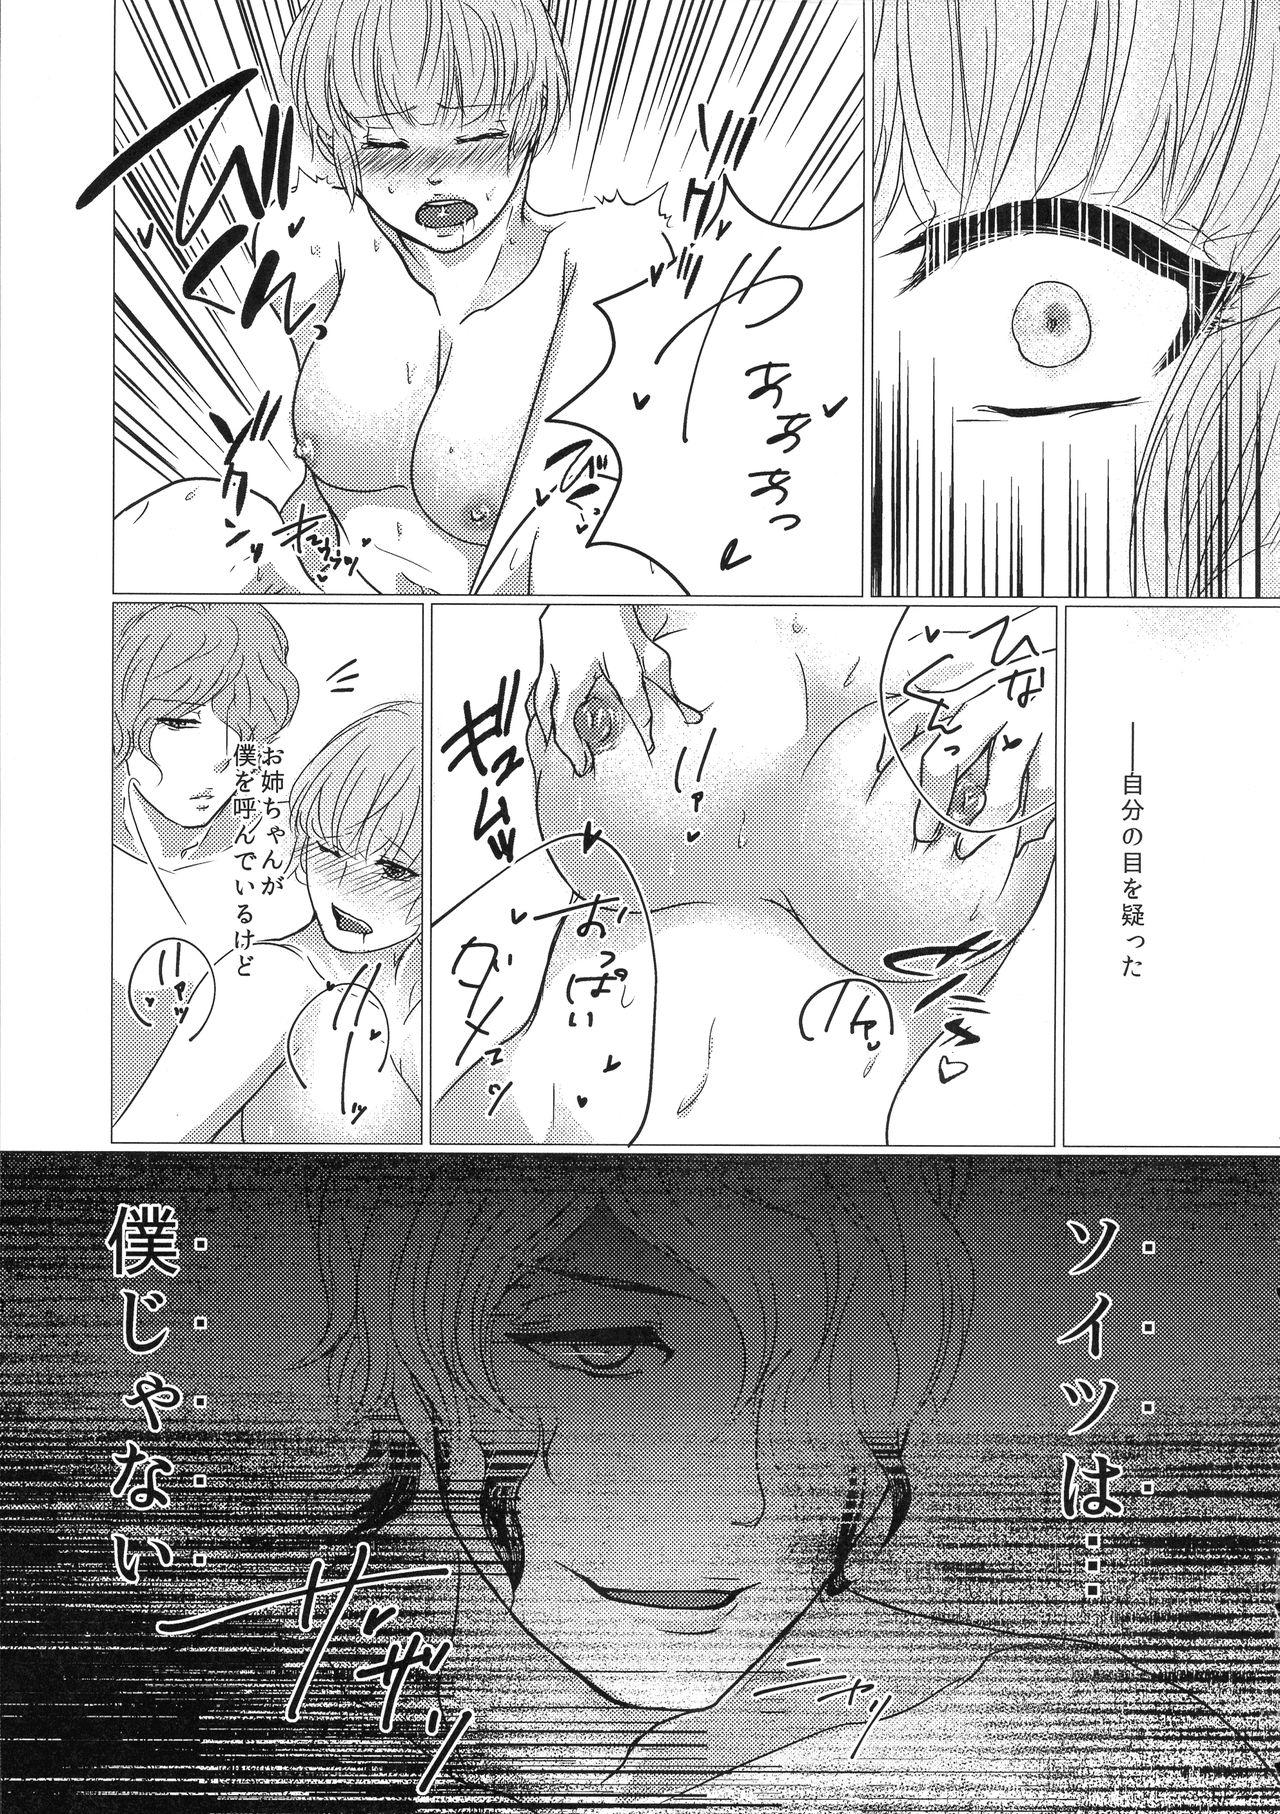 Doggystyle I/O - Psycho-pass Oral Porn - Page 9